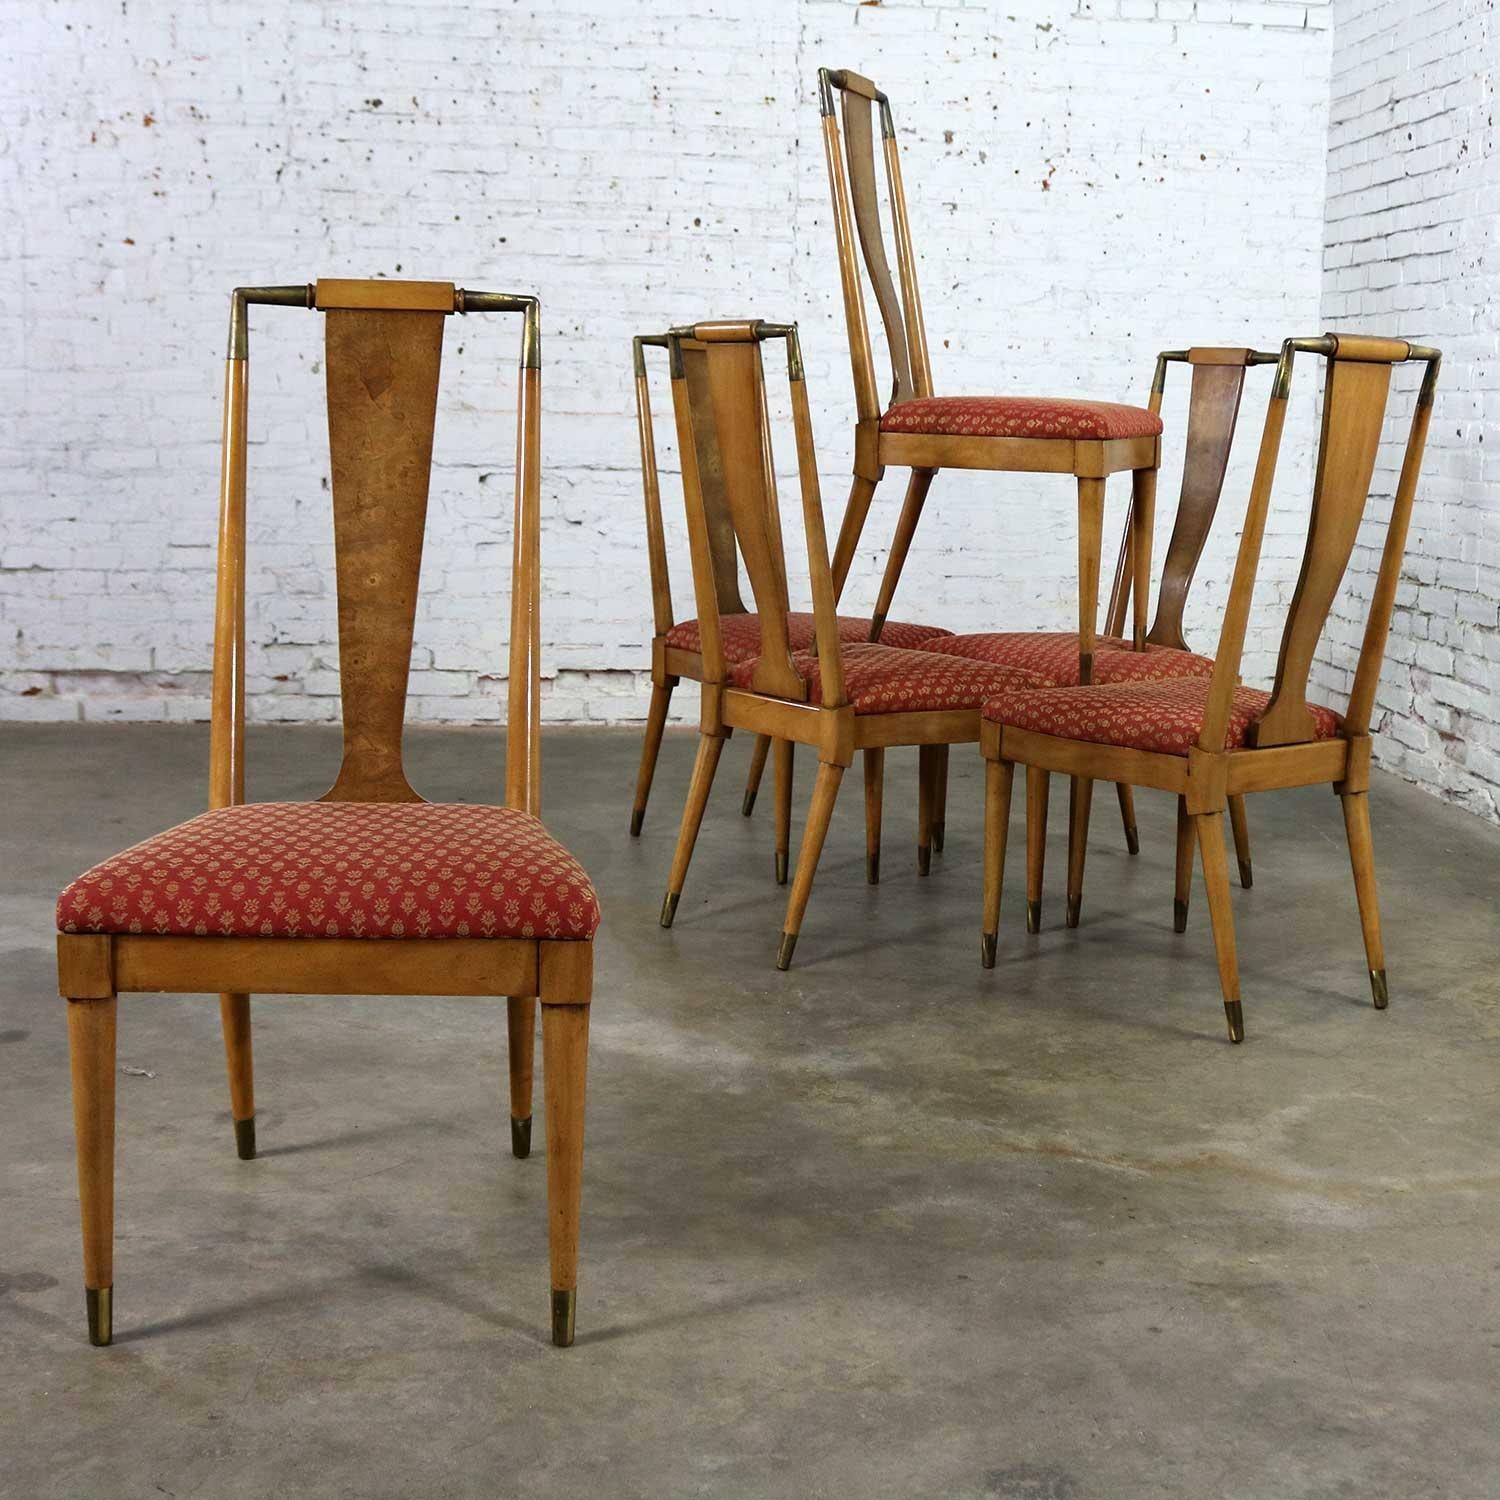 Hollywood Regency Midcentury Contempora Dining Chairs by William Clingman for J. L. Metz Set of 6 For Sale